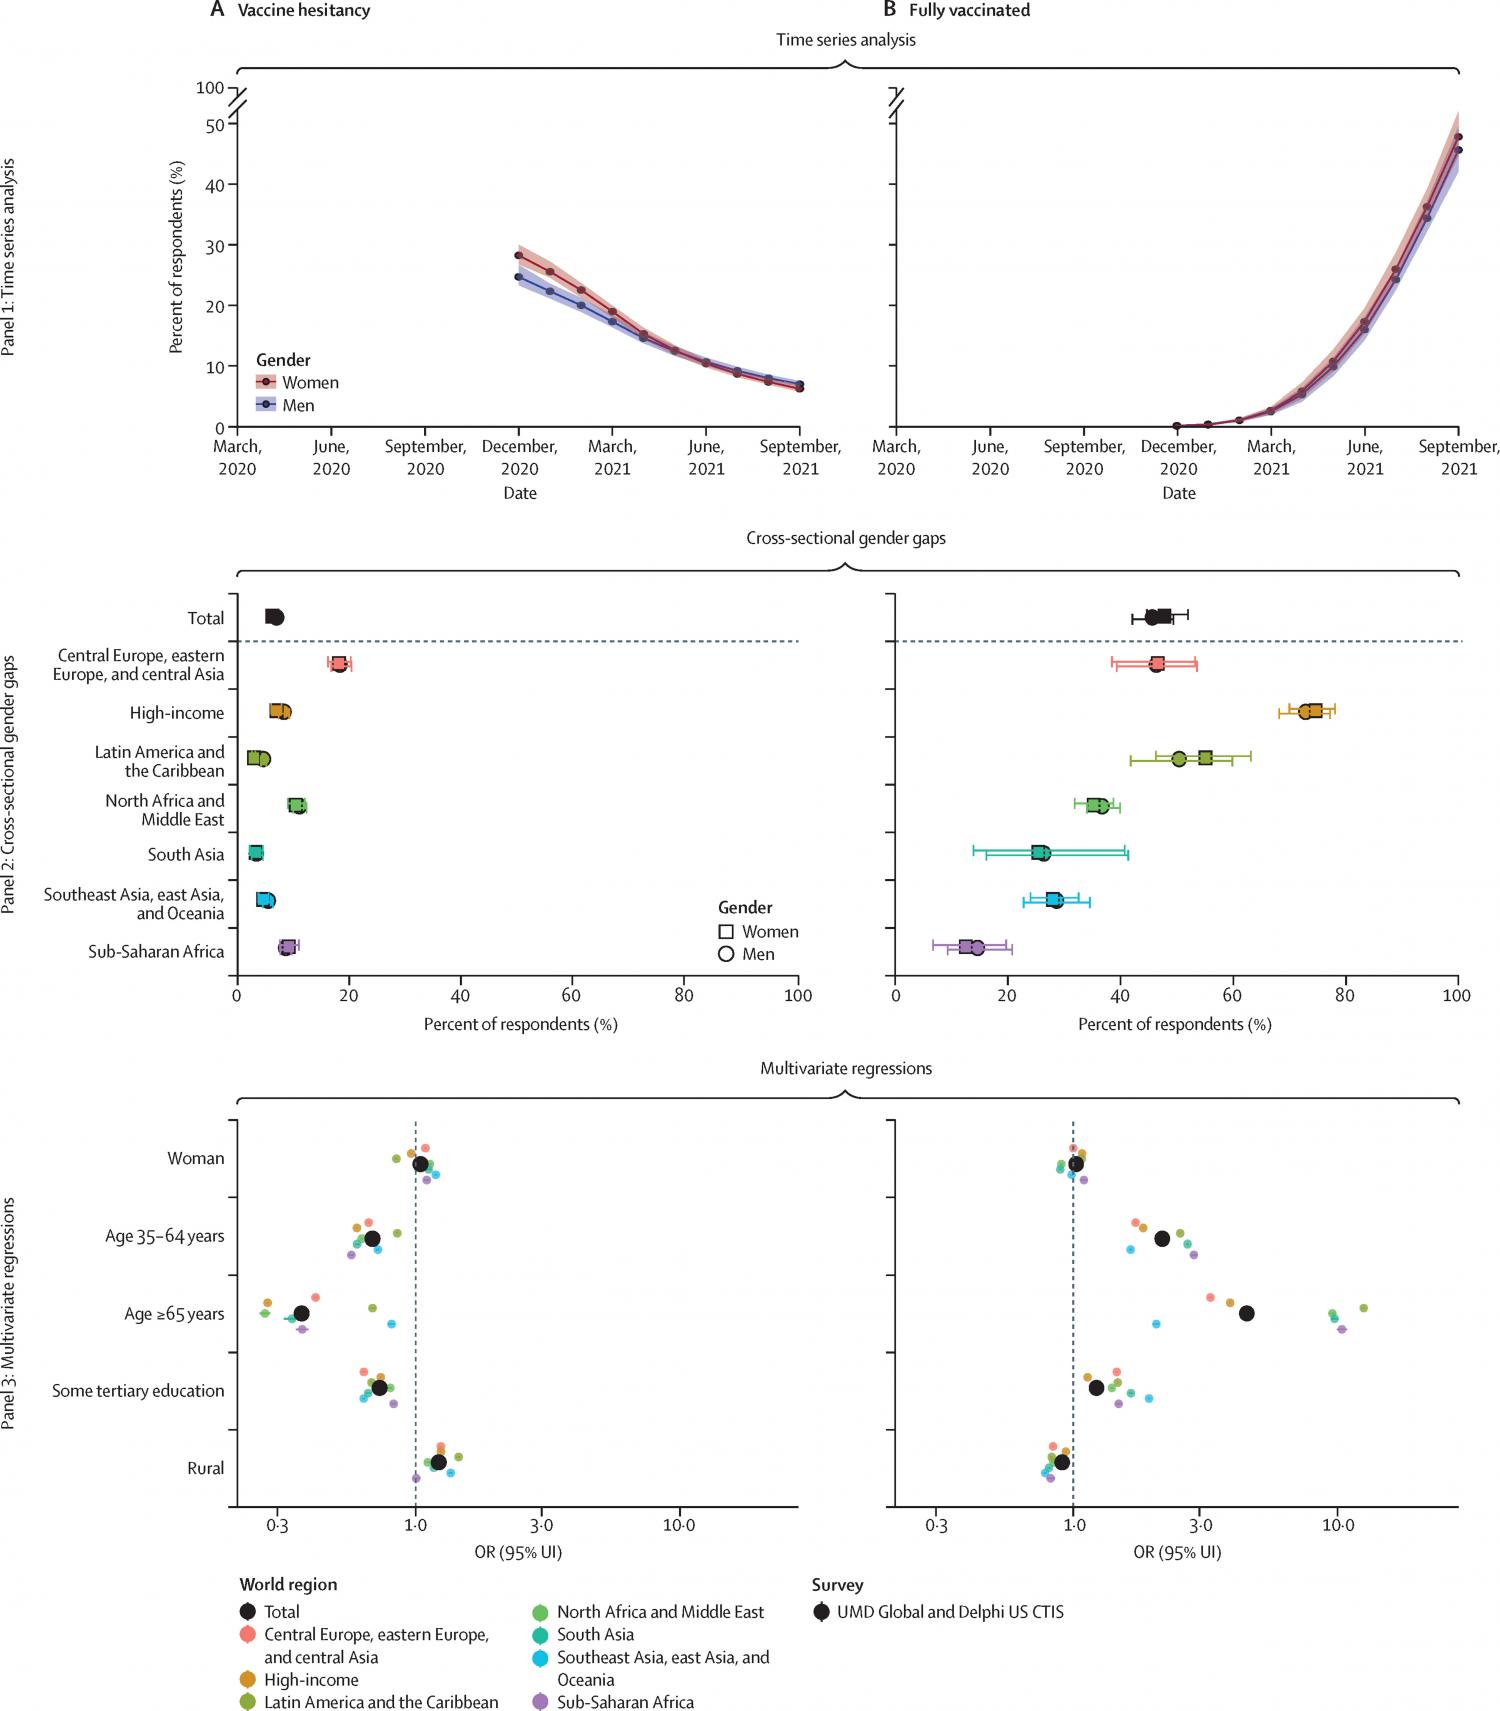 Figure 1. Time-series, cross-sectional, and multivariate logistic regression analyses for vaccination hesitancy and uptake indicators